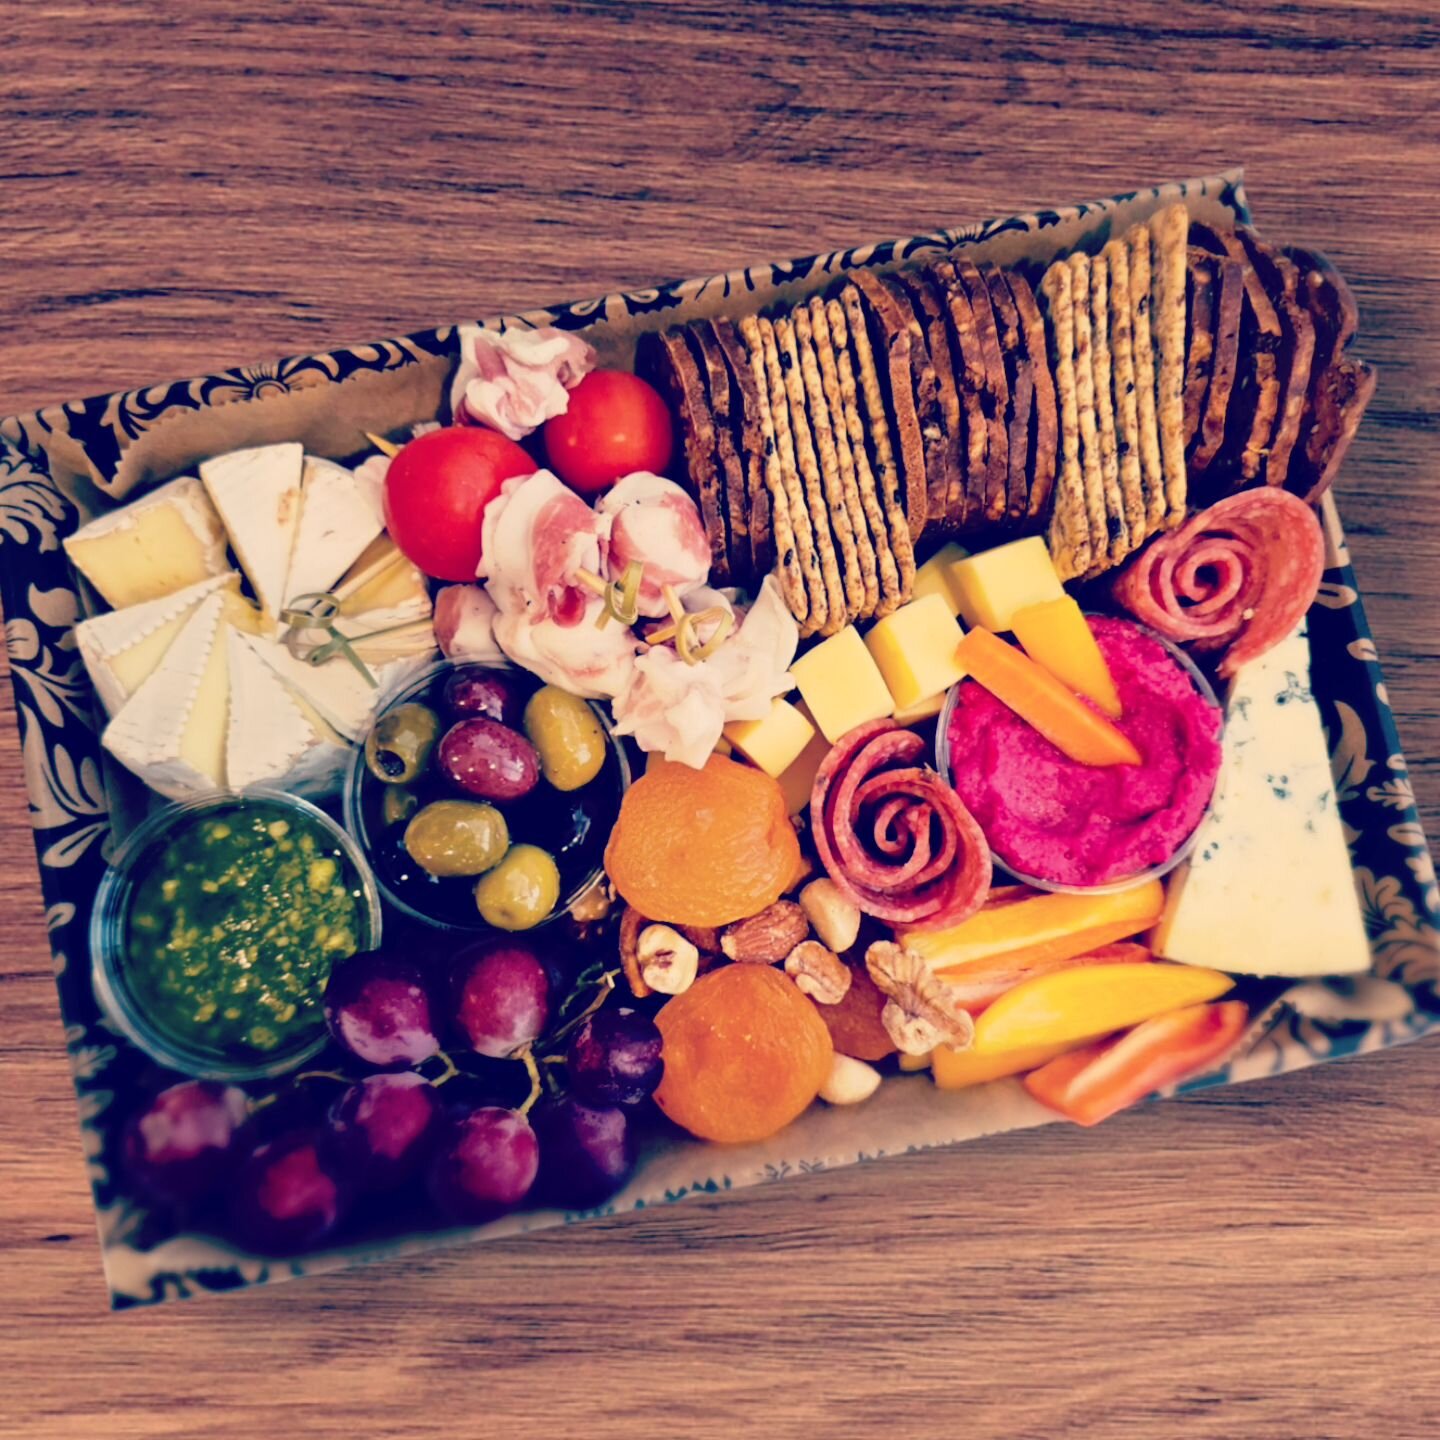 Our small Grazing Platter makes the perfect gift for that Grazing loving friend 🧡 (it's me, I'm that friend 🤤).

Or head out for a beautiful autumn picnic for two 🥰 

🧡

Order straight from our website - www.ellajayecatering.co.nz